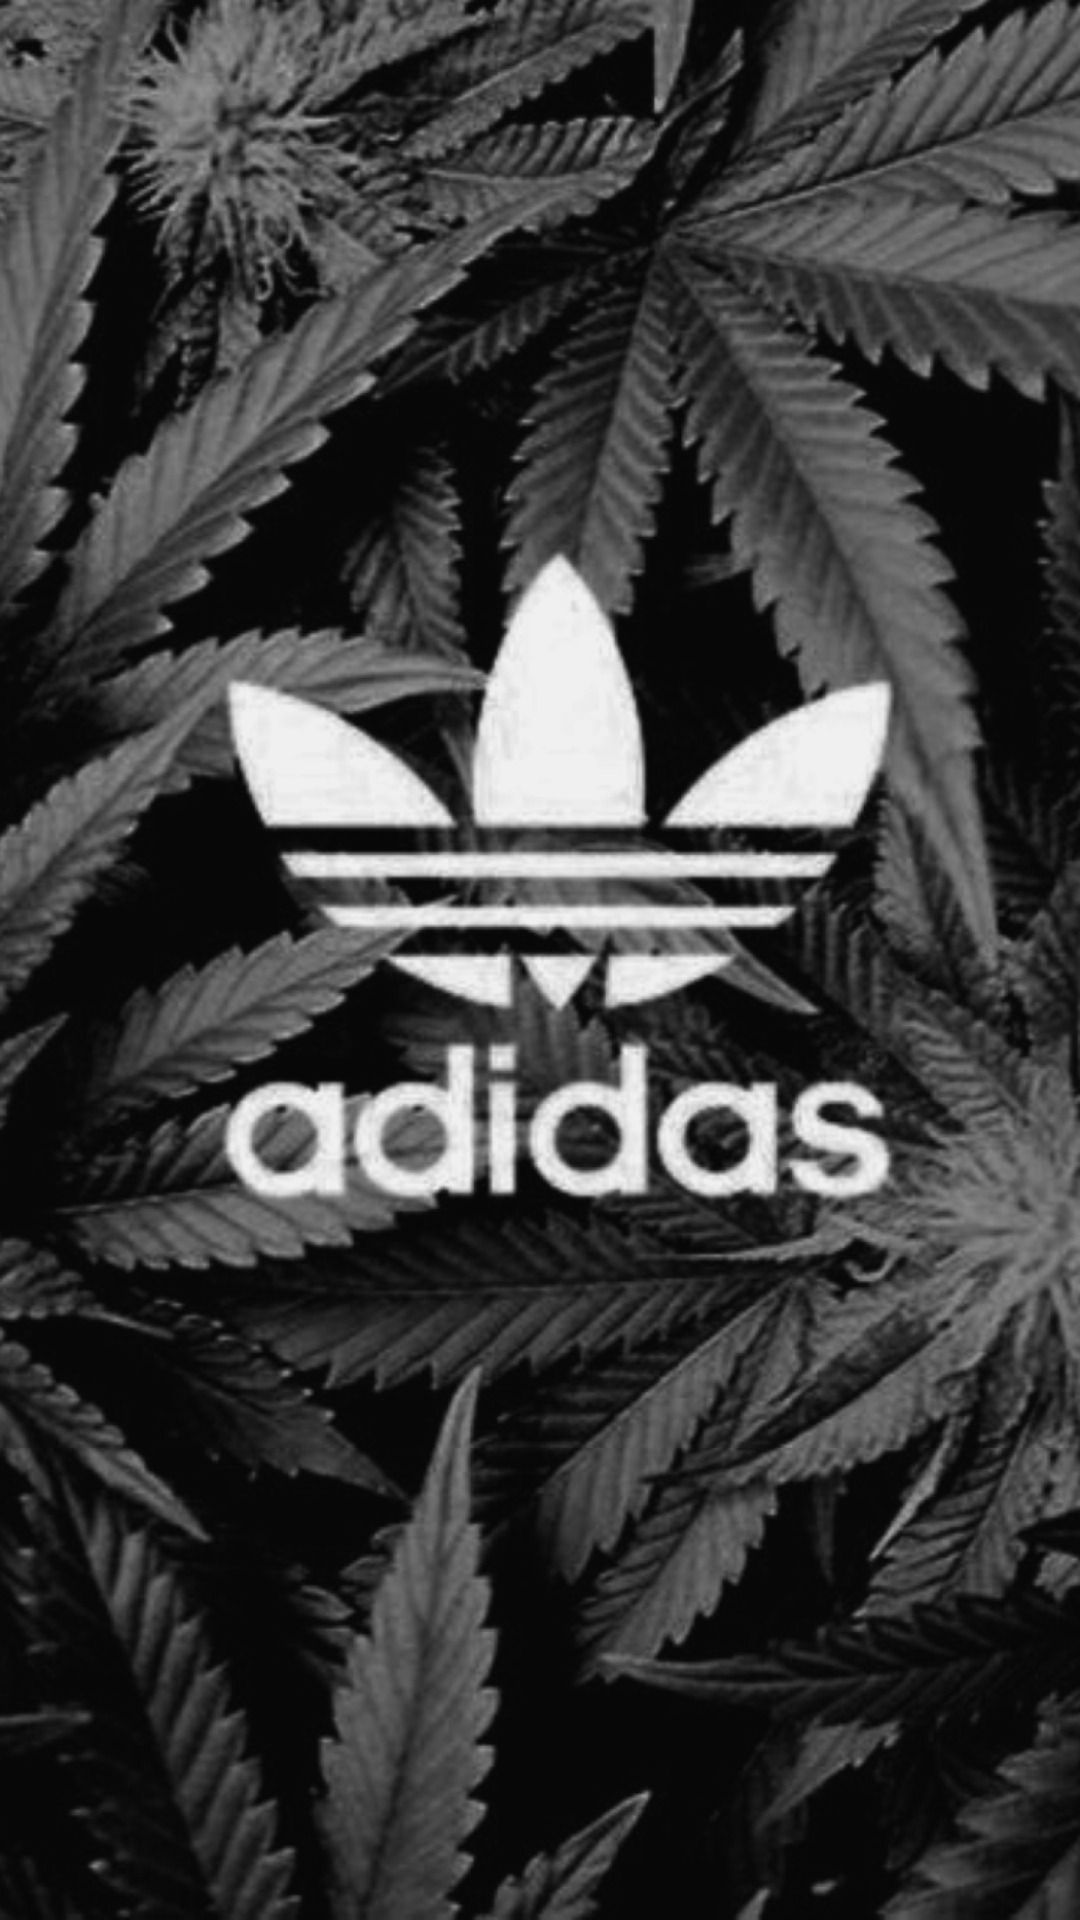 Adidas wallpaper for android